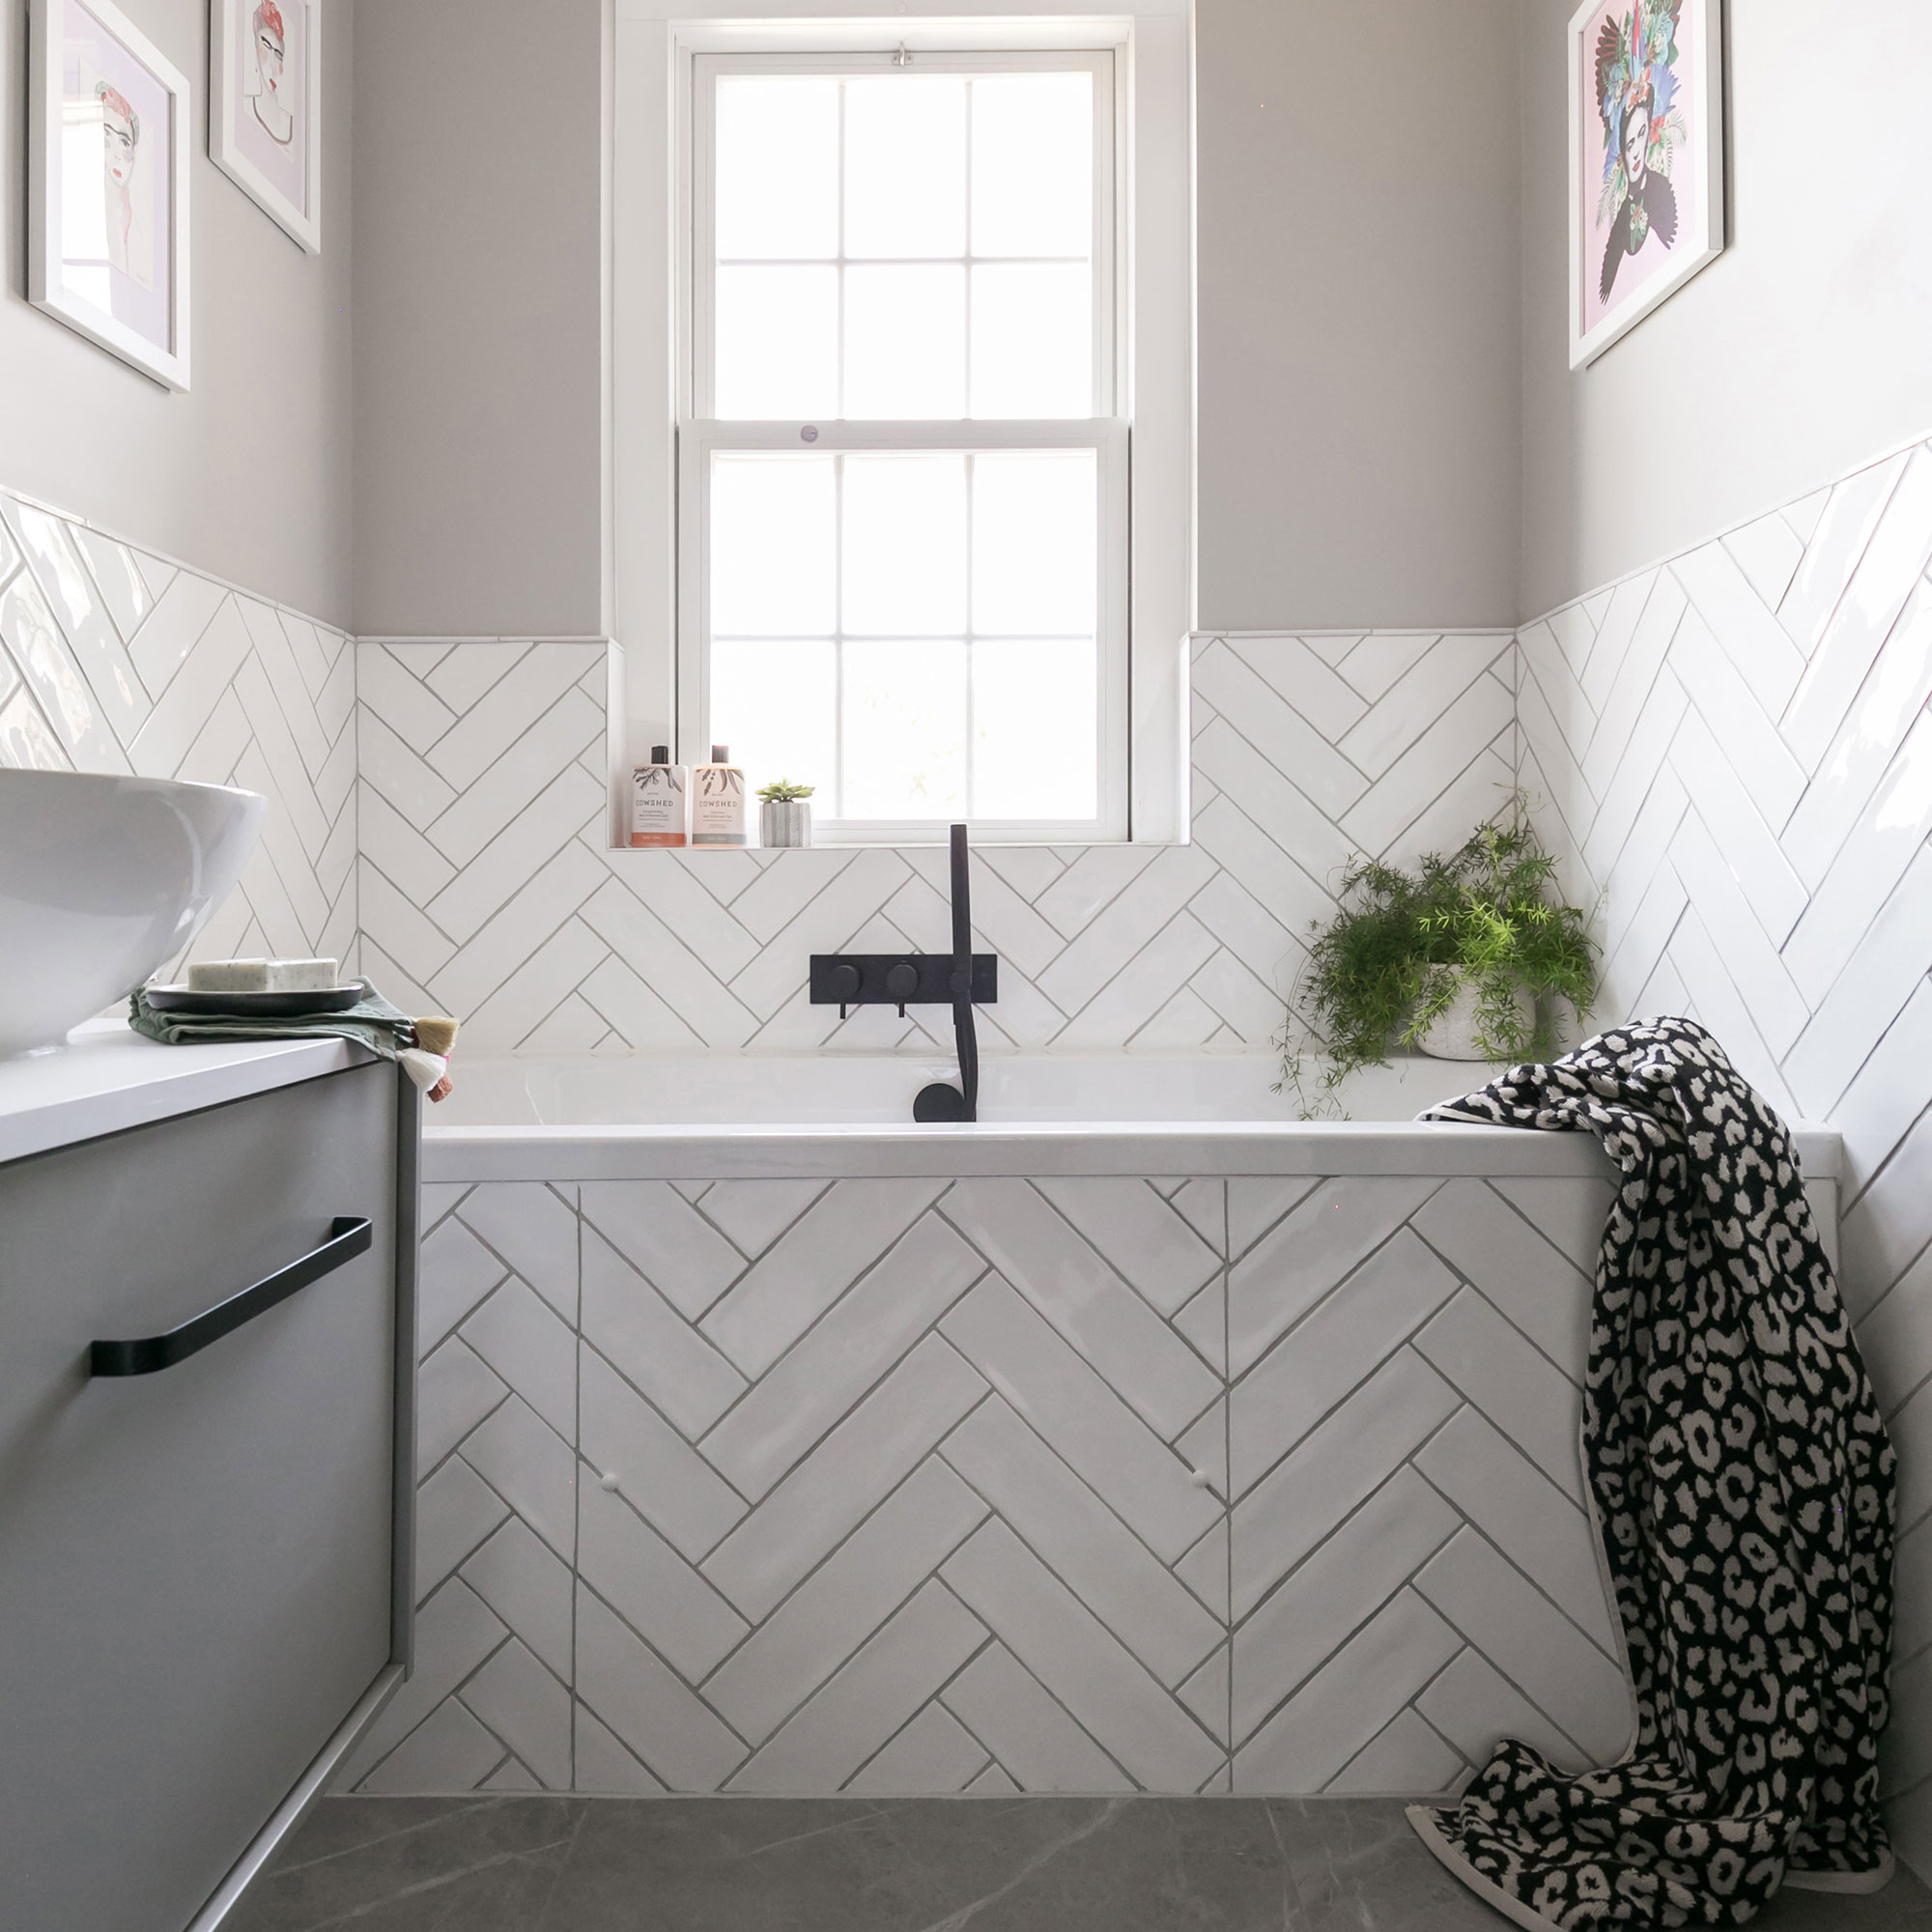 32 Small Bathroom Ideas To Make A Style Statement | Ideal Home